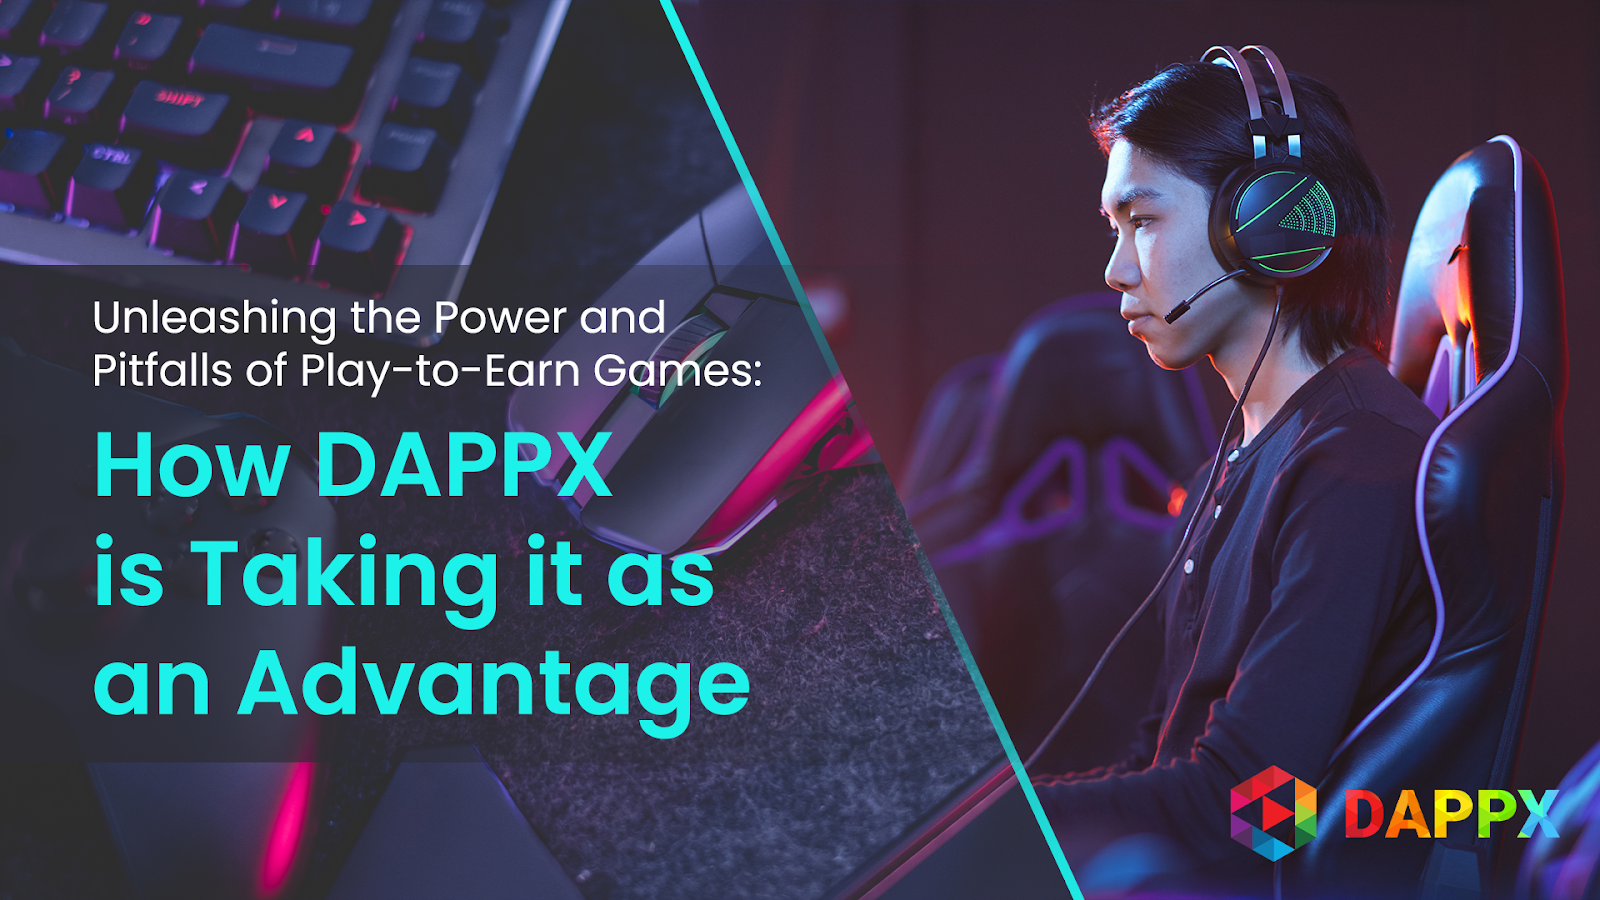 Unleasing the power and pitfalls of play-to-earn: How DAPPX is taking it as an advantage